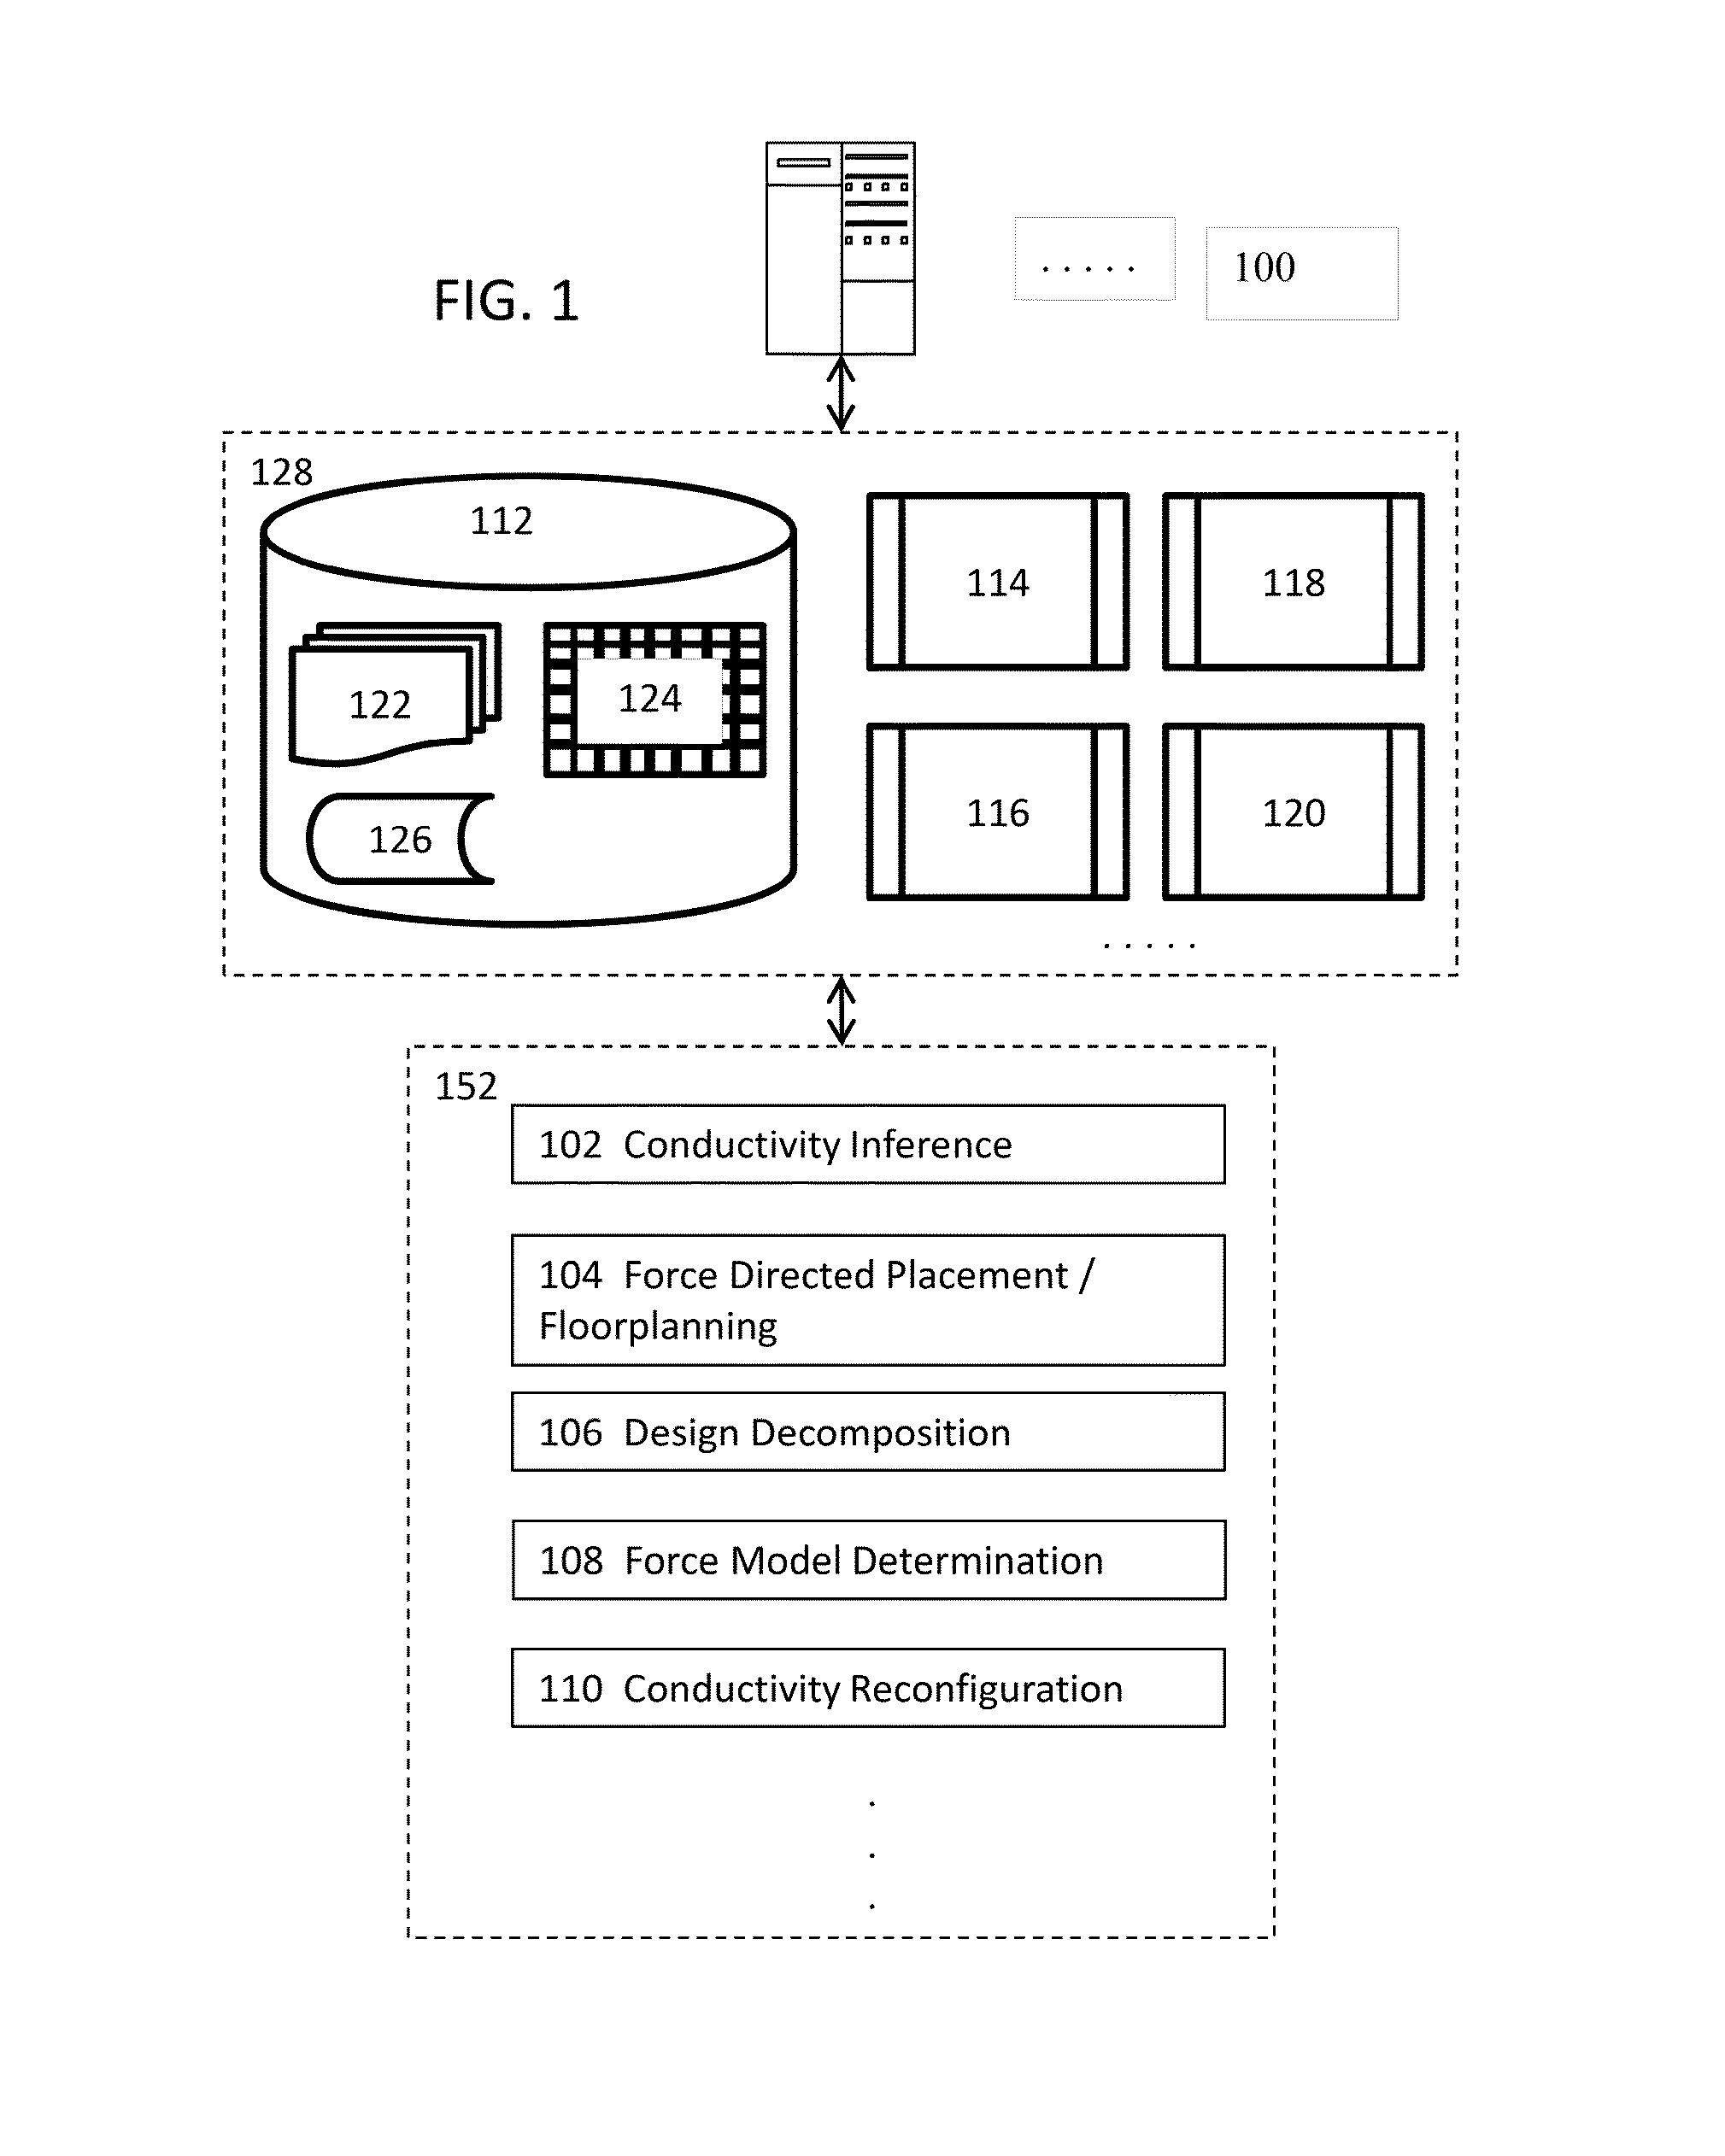 Methods, systems, and articles of manufacture for implementing physical design decomposition with custom connectivity